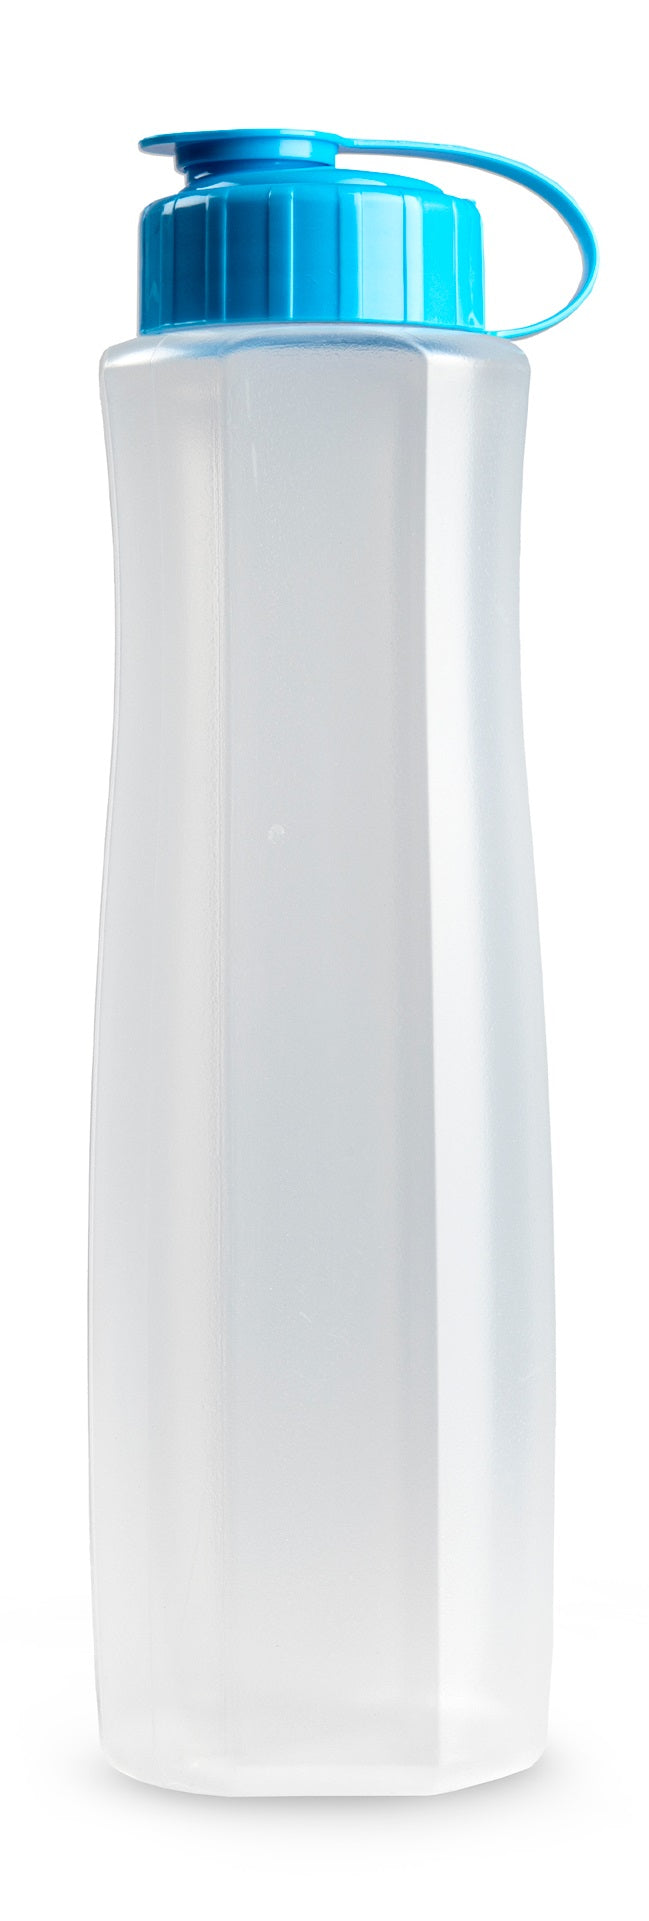 Plastic Forte Large Water Bottle,1.5L - Available in different colors